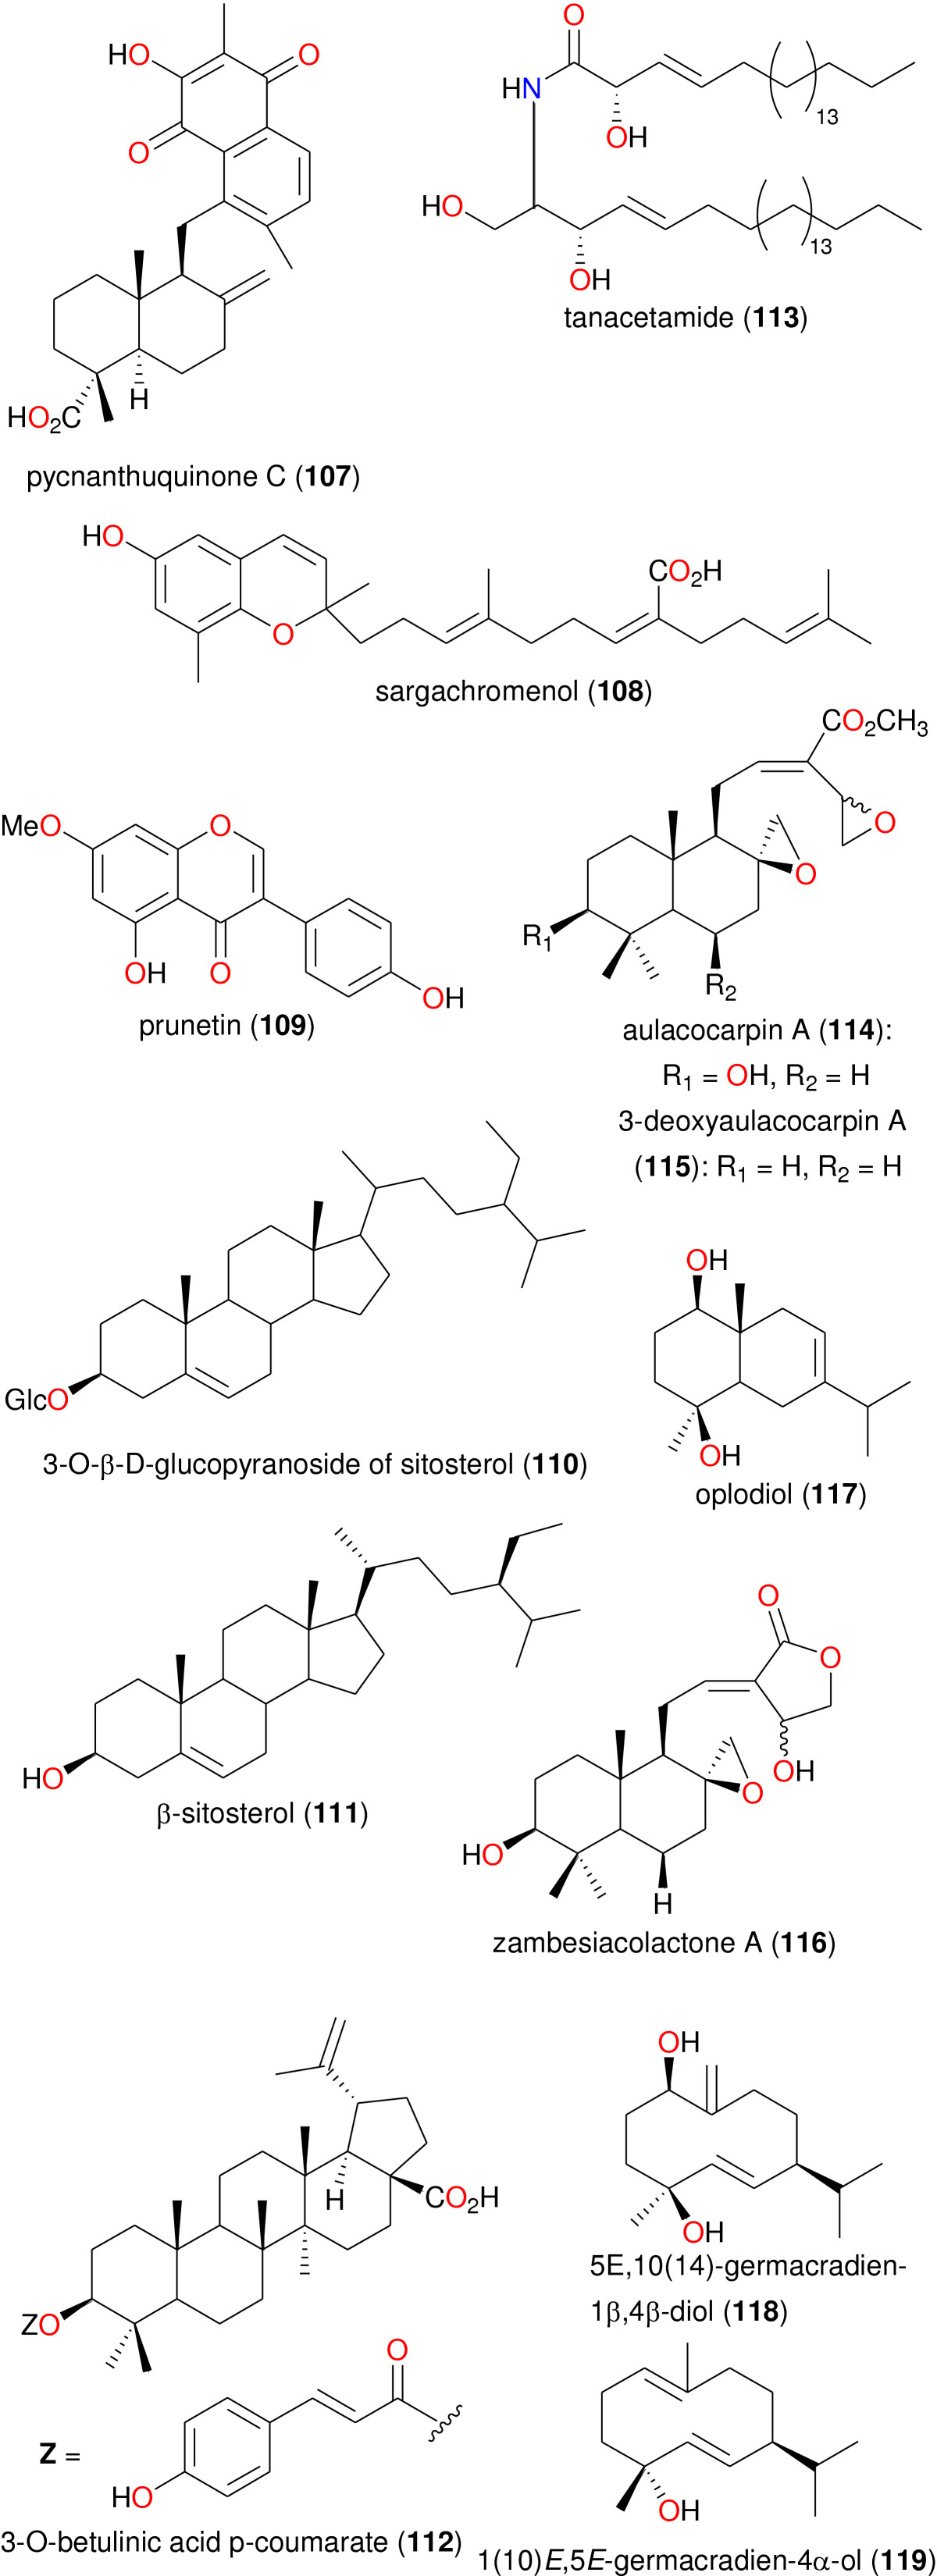 Chemical structures of bioactive metabolites IV. Compounds 107 to 119